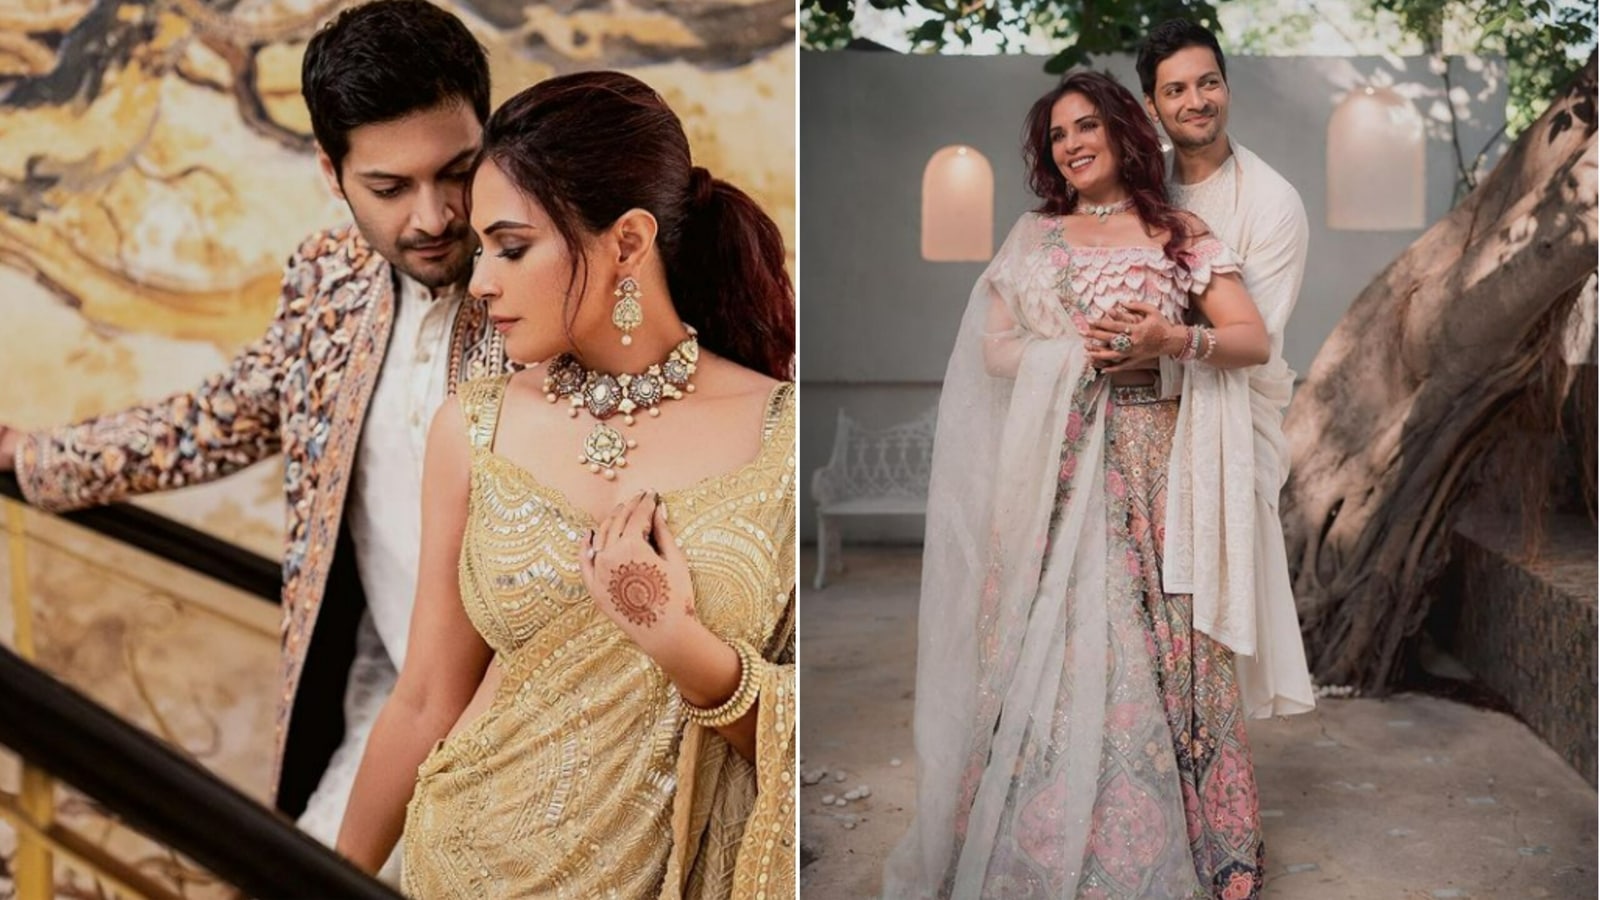 ali-fazal-says-he-has-seen-very-few-marriages-work-in-his-life-would-like-to-disprove-it-with-richa-chadha